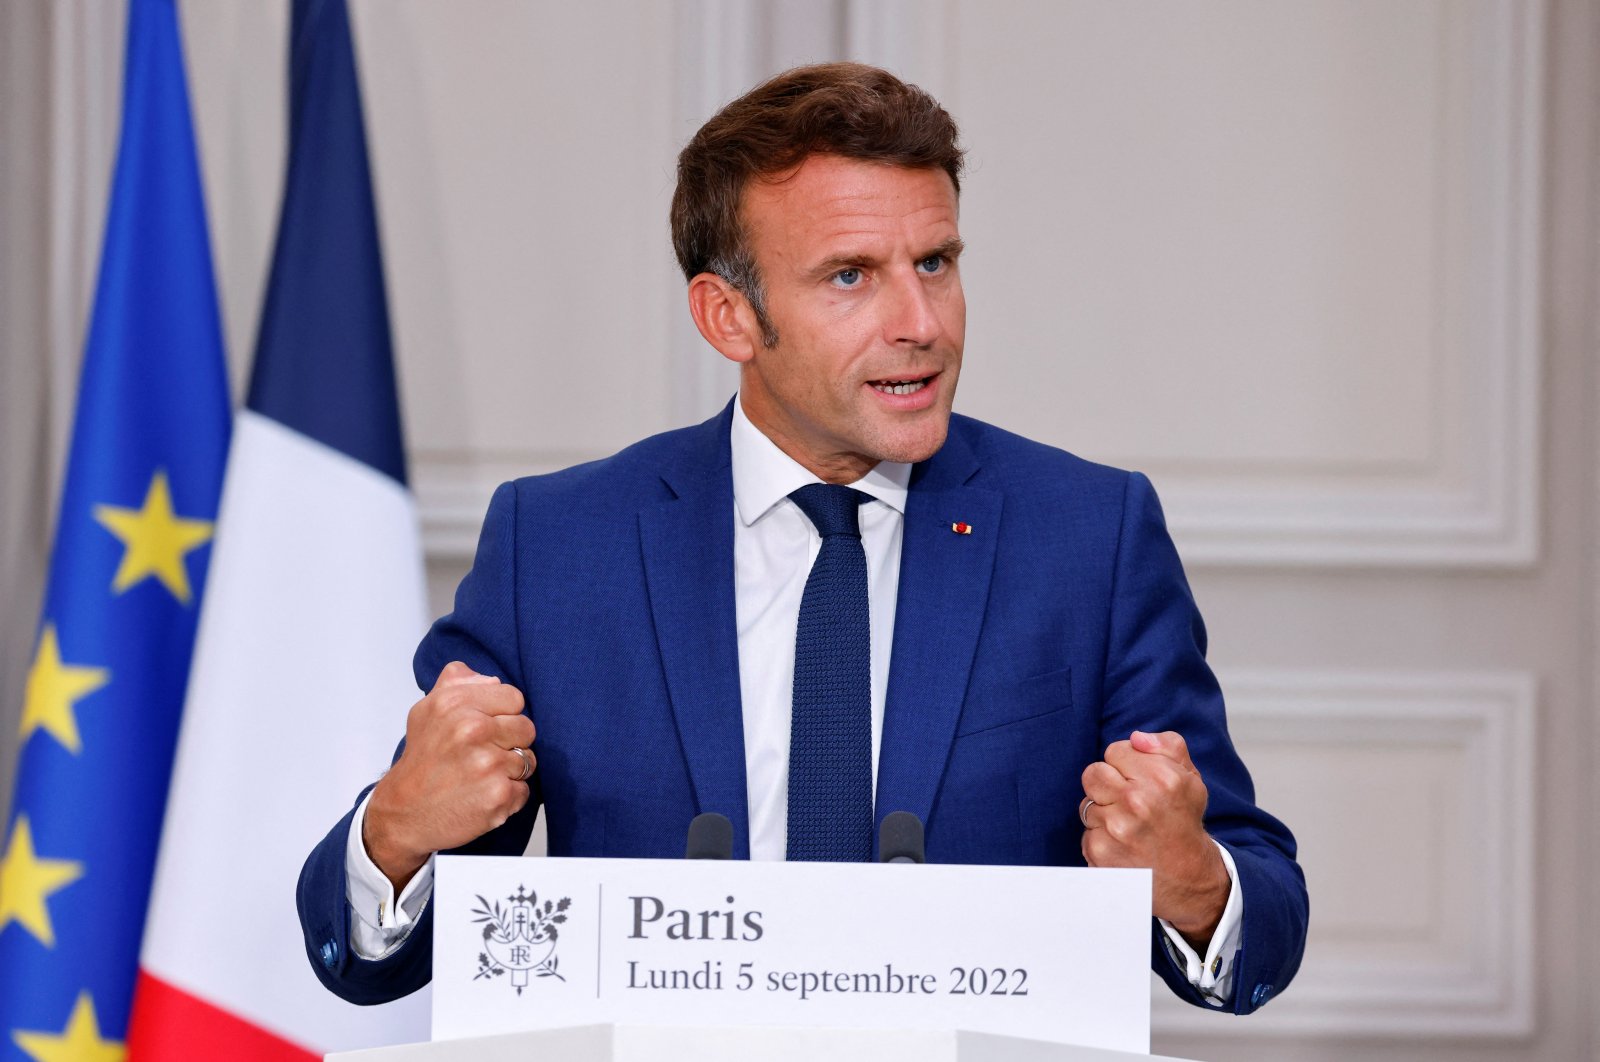 French President Emmanuel Macron delivers a speech after a videoconference on the energy crisis with German Chancellor Olaf Scholz, at the Elysee Palace in Paris, France, Sept. 5, 2022. (Reuters Photo)